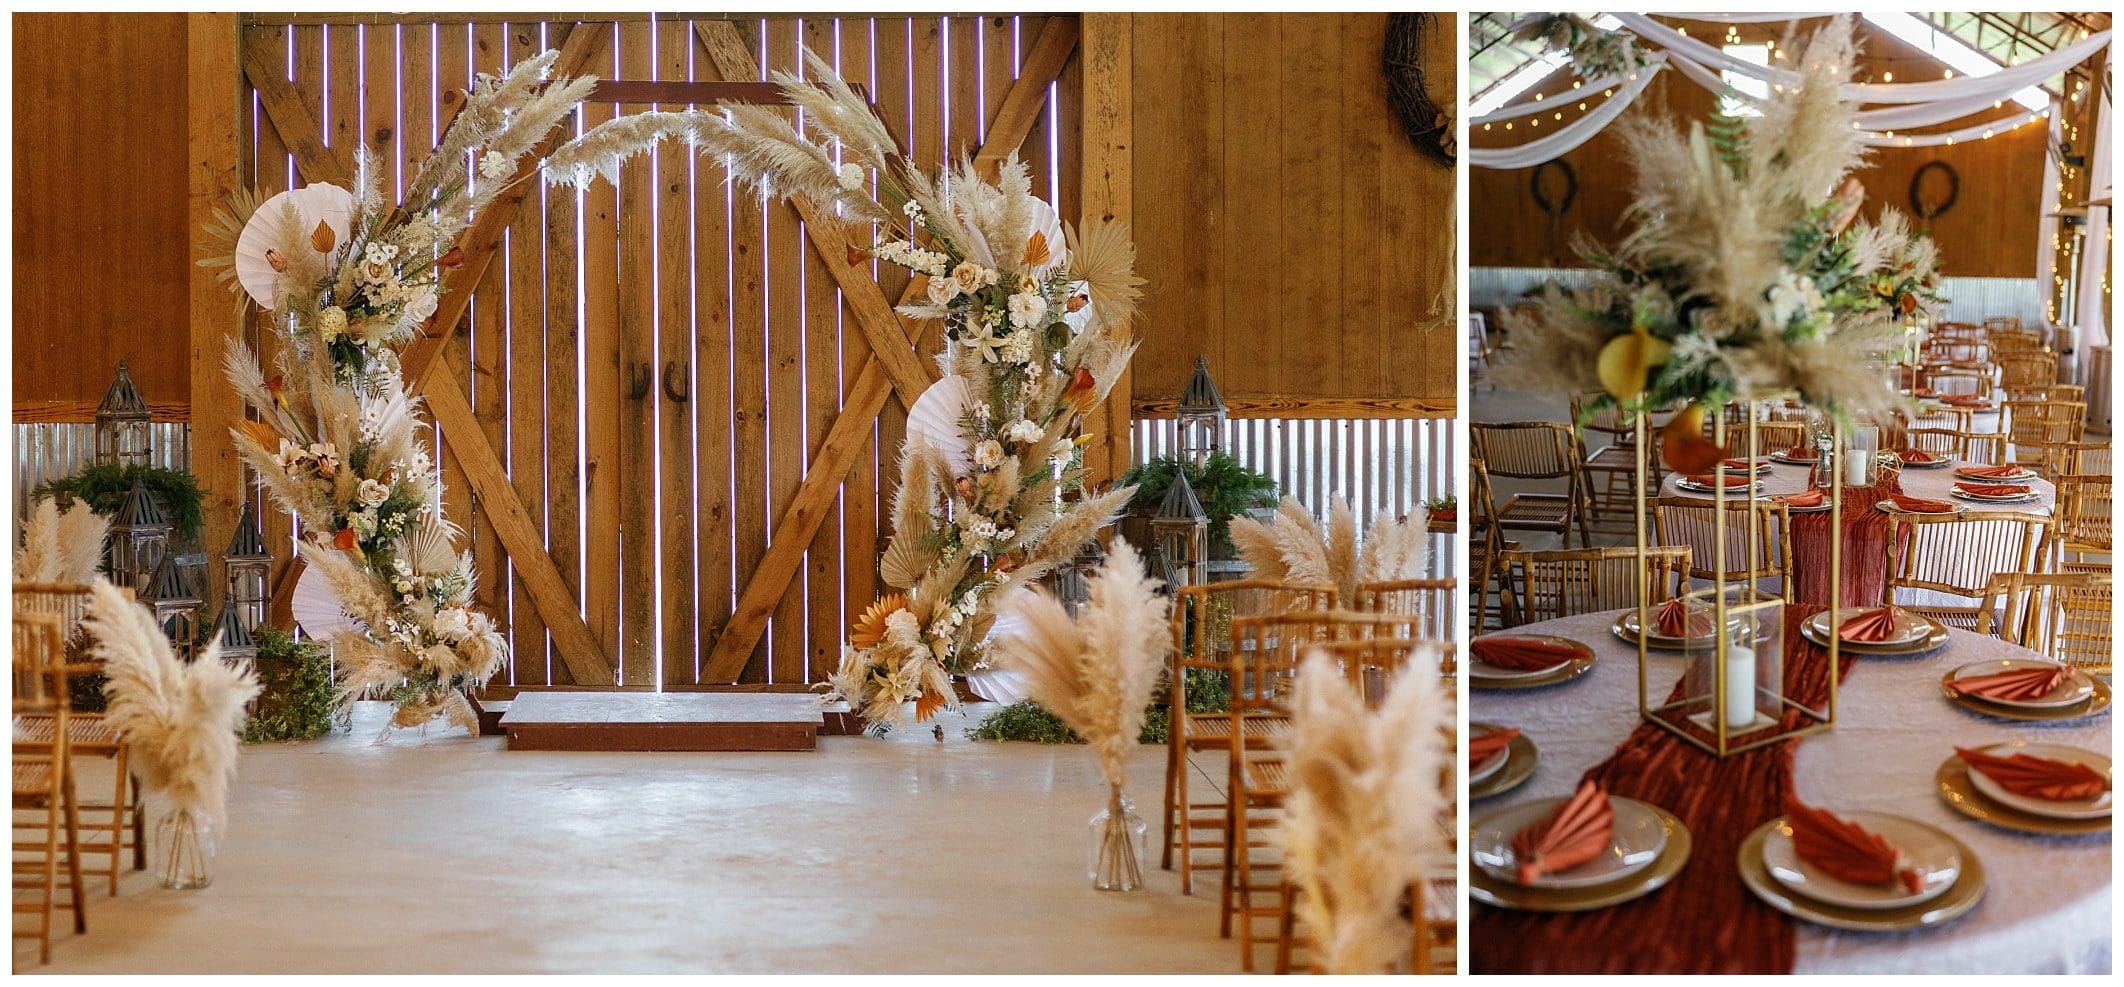 boho inspired wedding details with wicker chairs